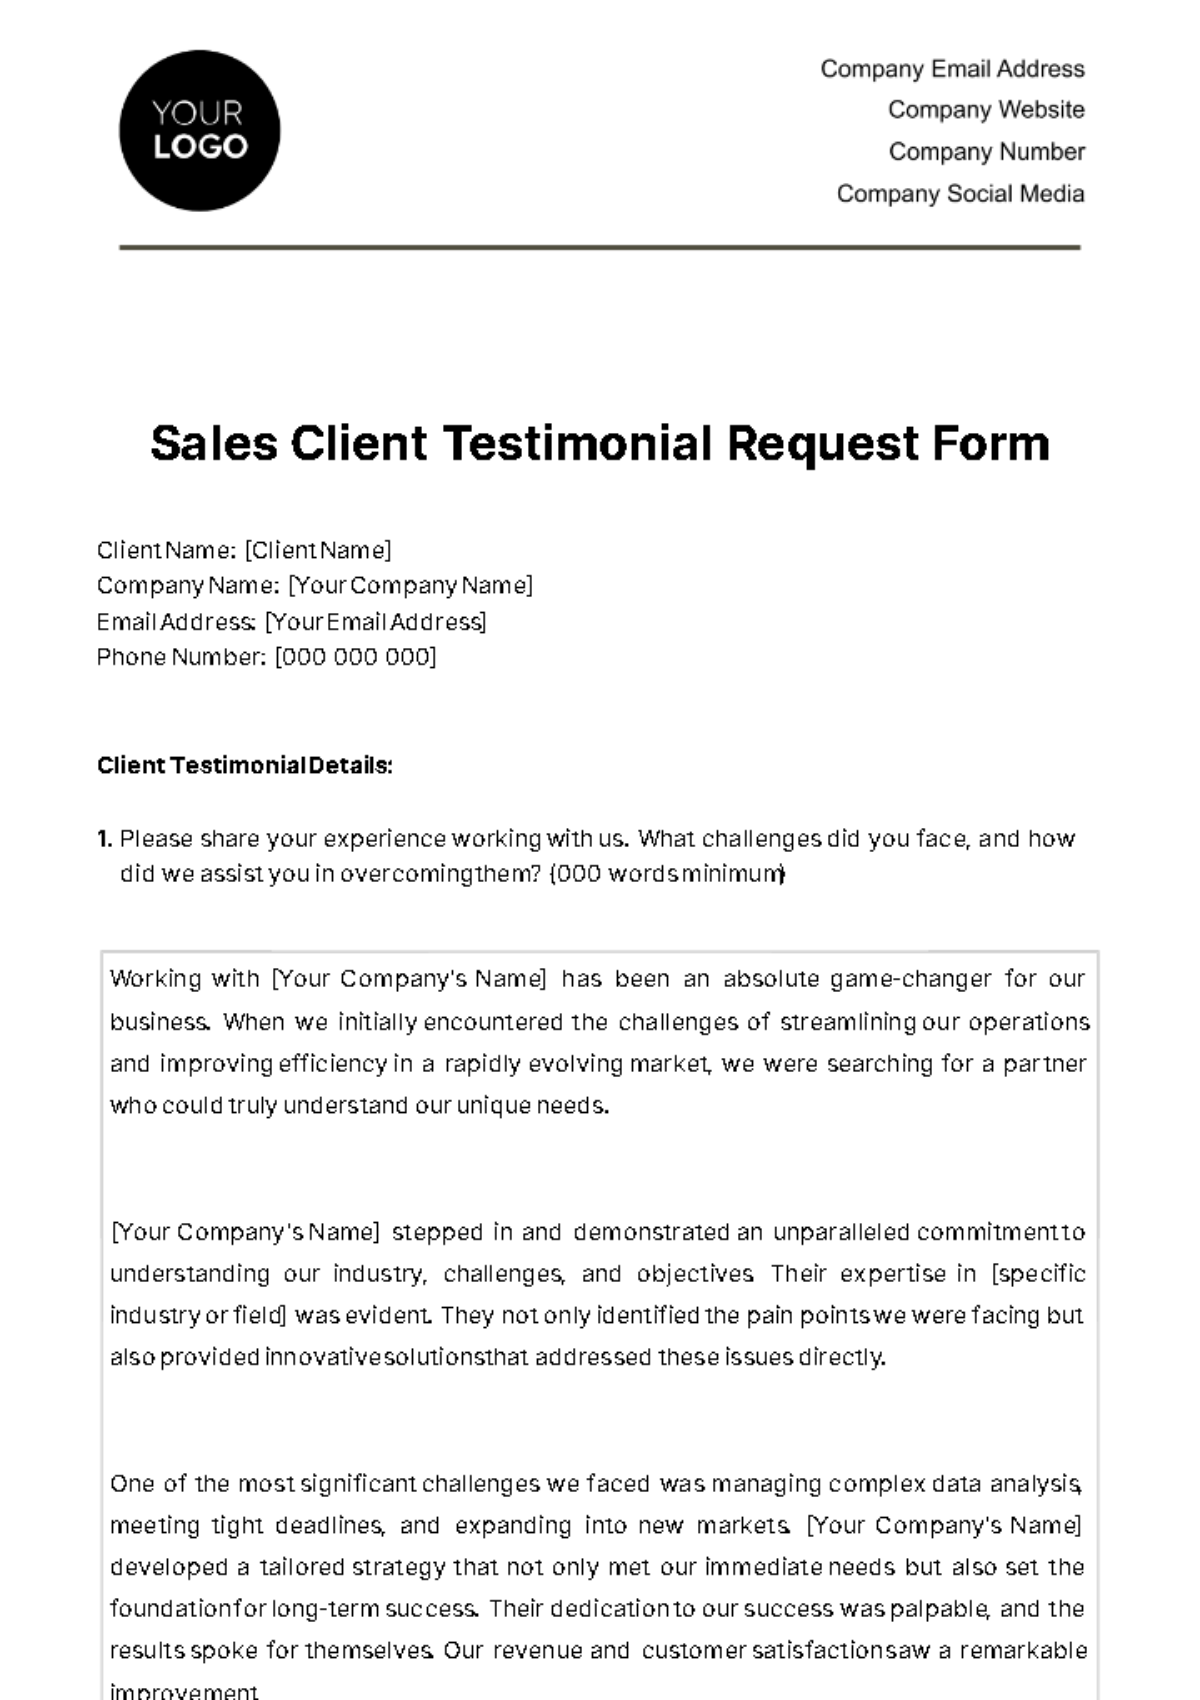 Free Sales Client Testimonial Request Form Template